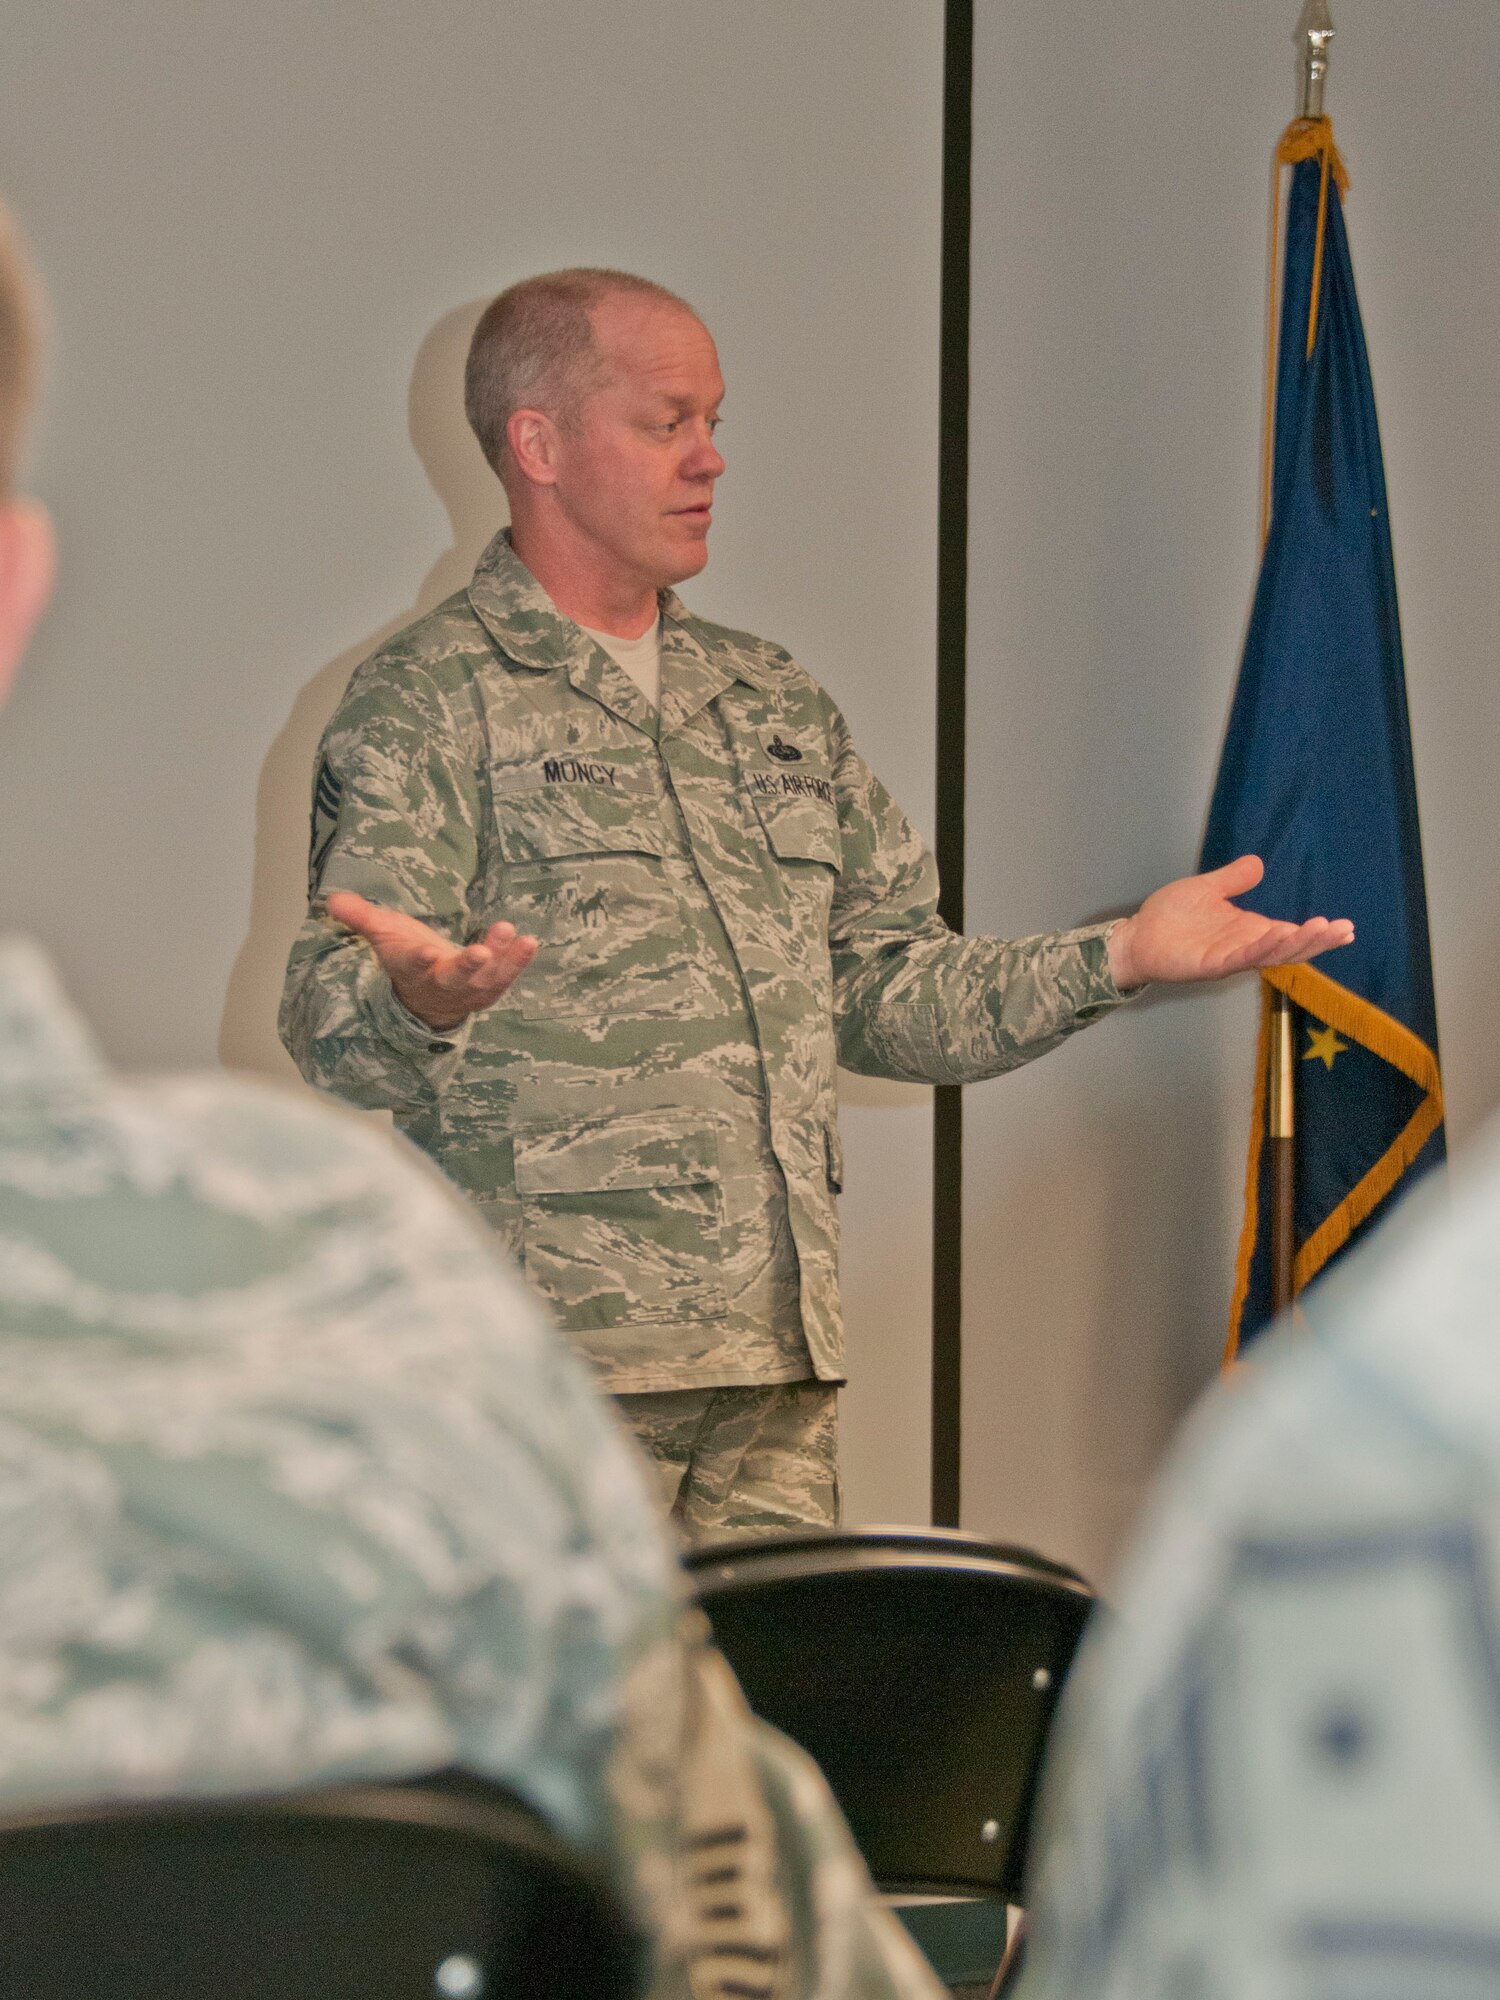 JOINT BASE ELMENDORF-RICHARDSON -- Chief Master Sgt. Chris Muncy, the command chief of the Air National Guard,  speaks with the 176 Wing's cheifs and first sergeant here June 10. He visited the guardsmen during his routine visits to Air Guard bases across the nation. National Guard photo by Staff Sgt N. Alicia Goldberger